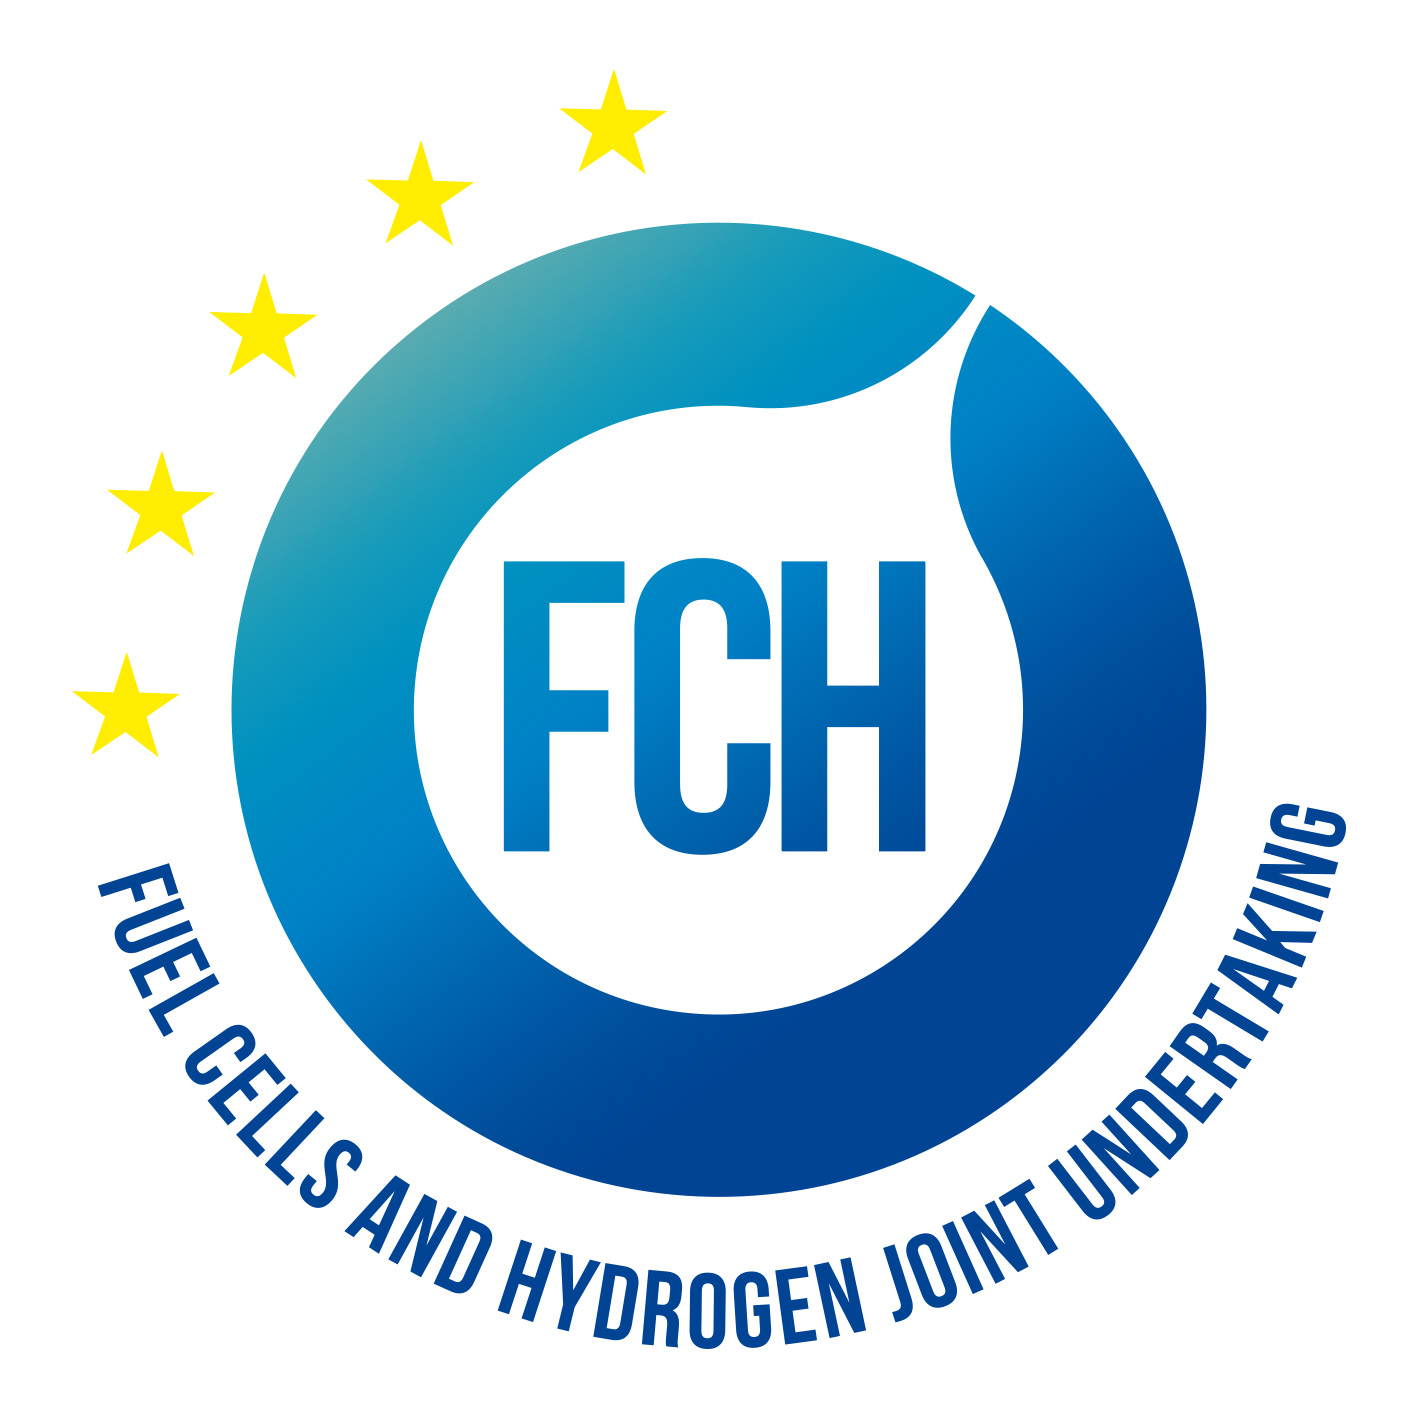 Fuel Cells and Hydrogen Joint Undertaking (FCH JU)